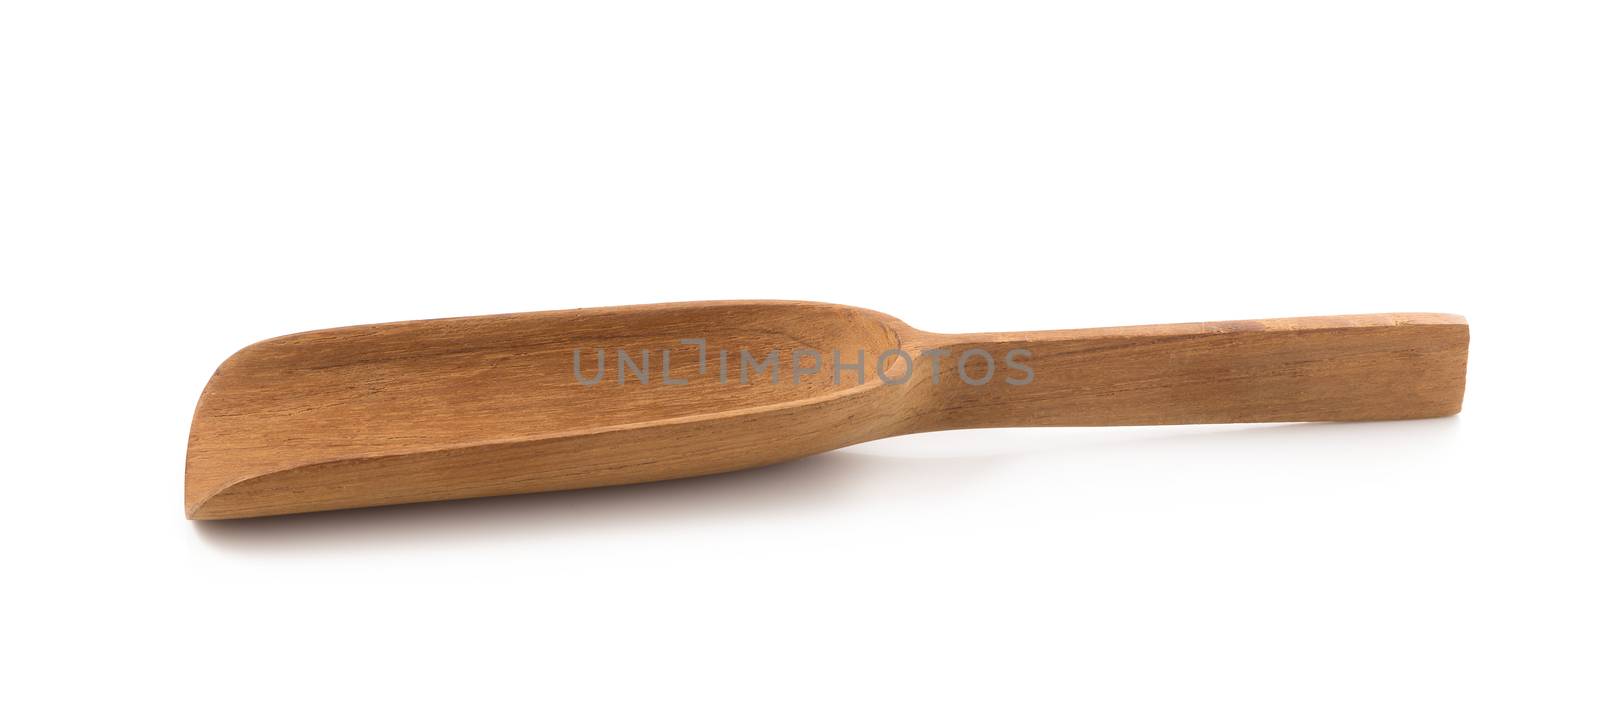 Empty wooden scoop isolated on a white background.